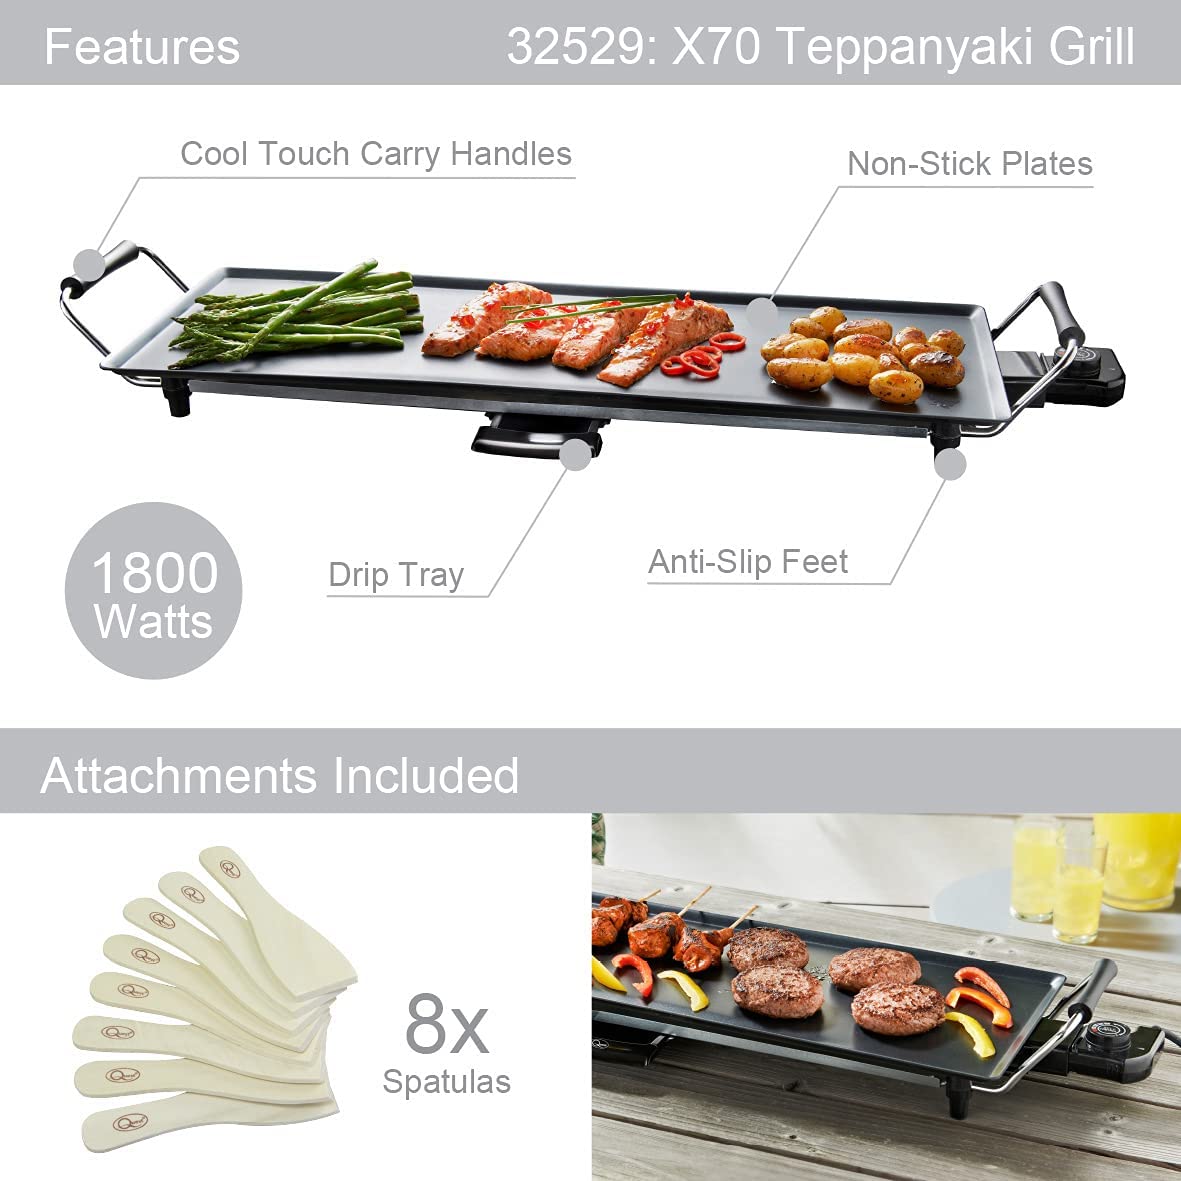 Large Quest Electric Non-Stick Table Top Grill - Teppanyaki (32529)